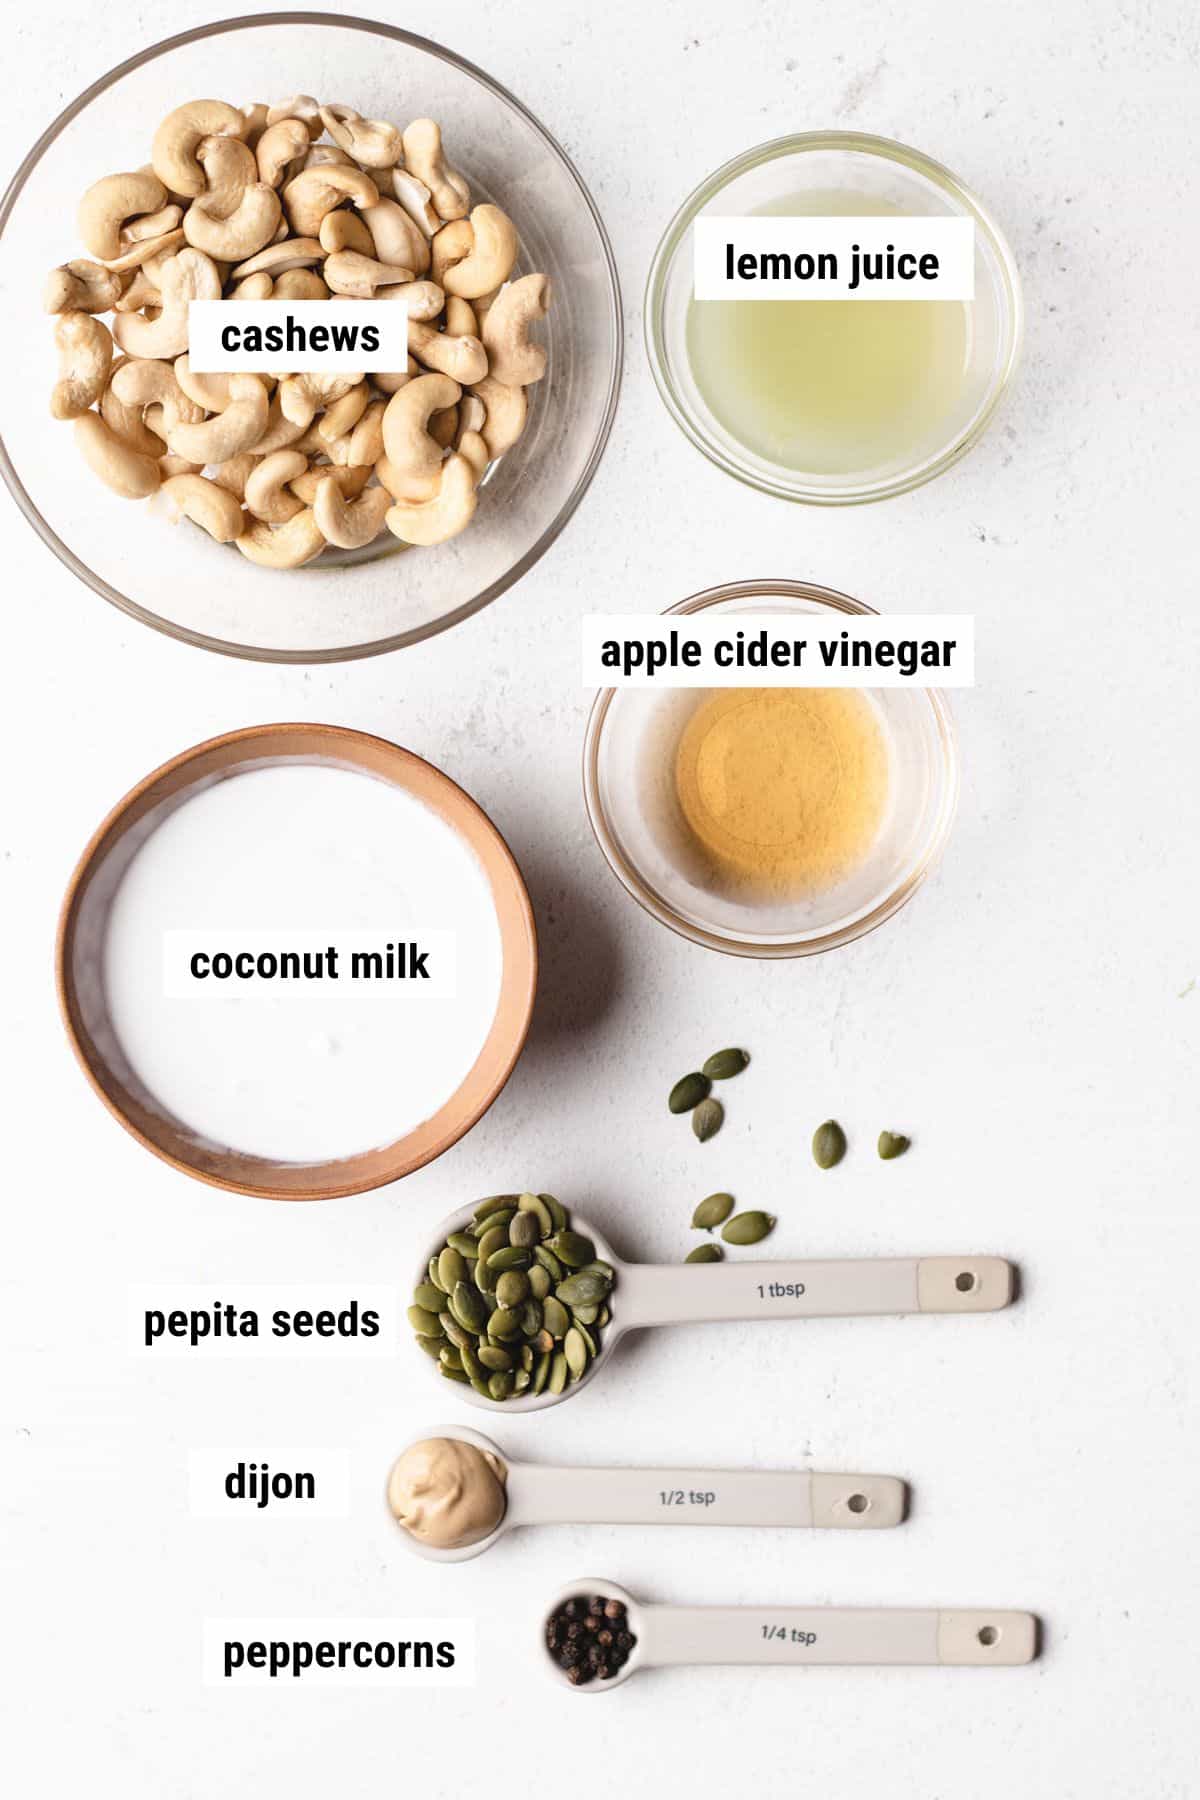 Photo of ingredients used in this recipe.